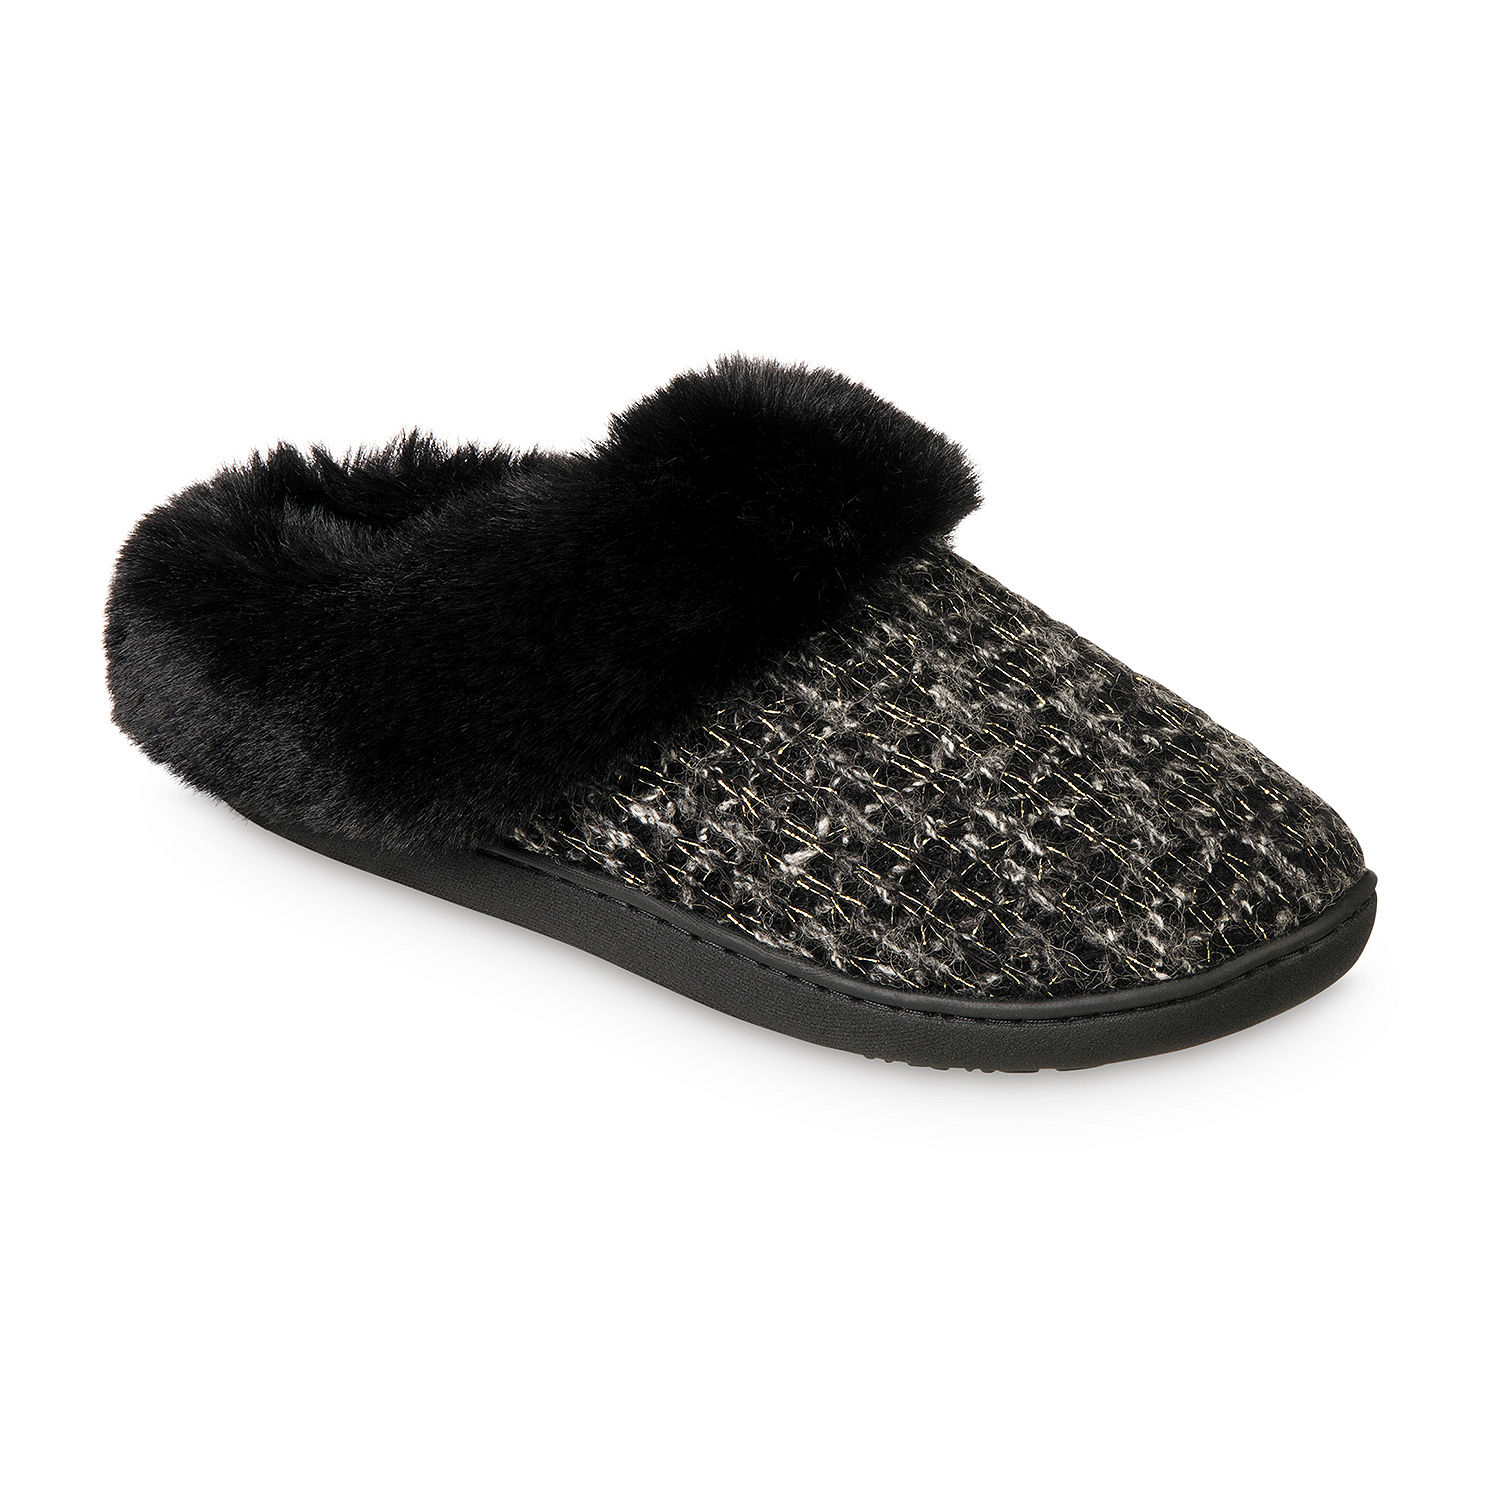 Isotoner Womens Clog Slippers - JCPenney